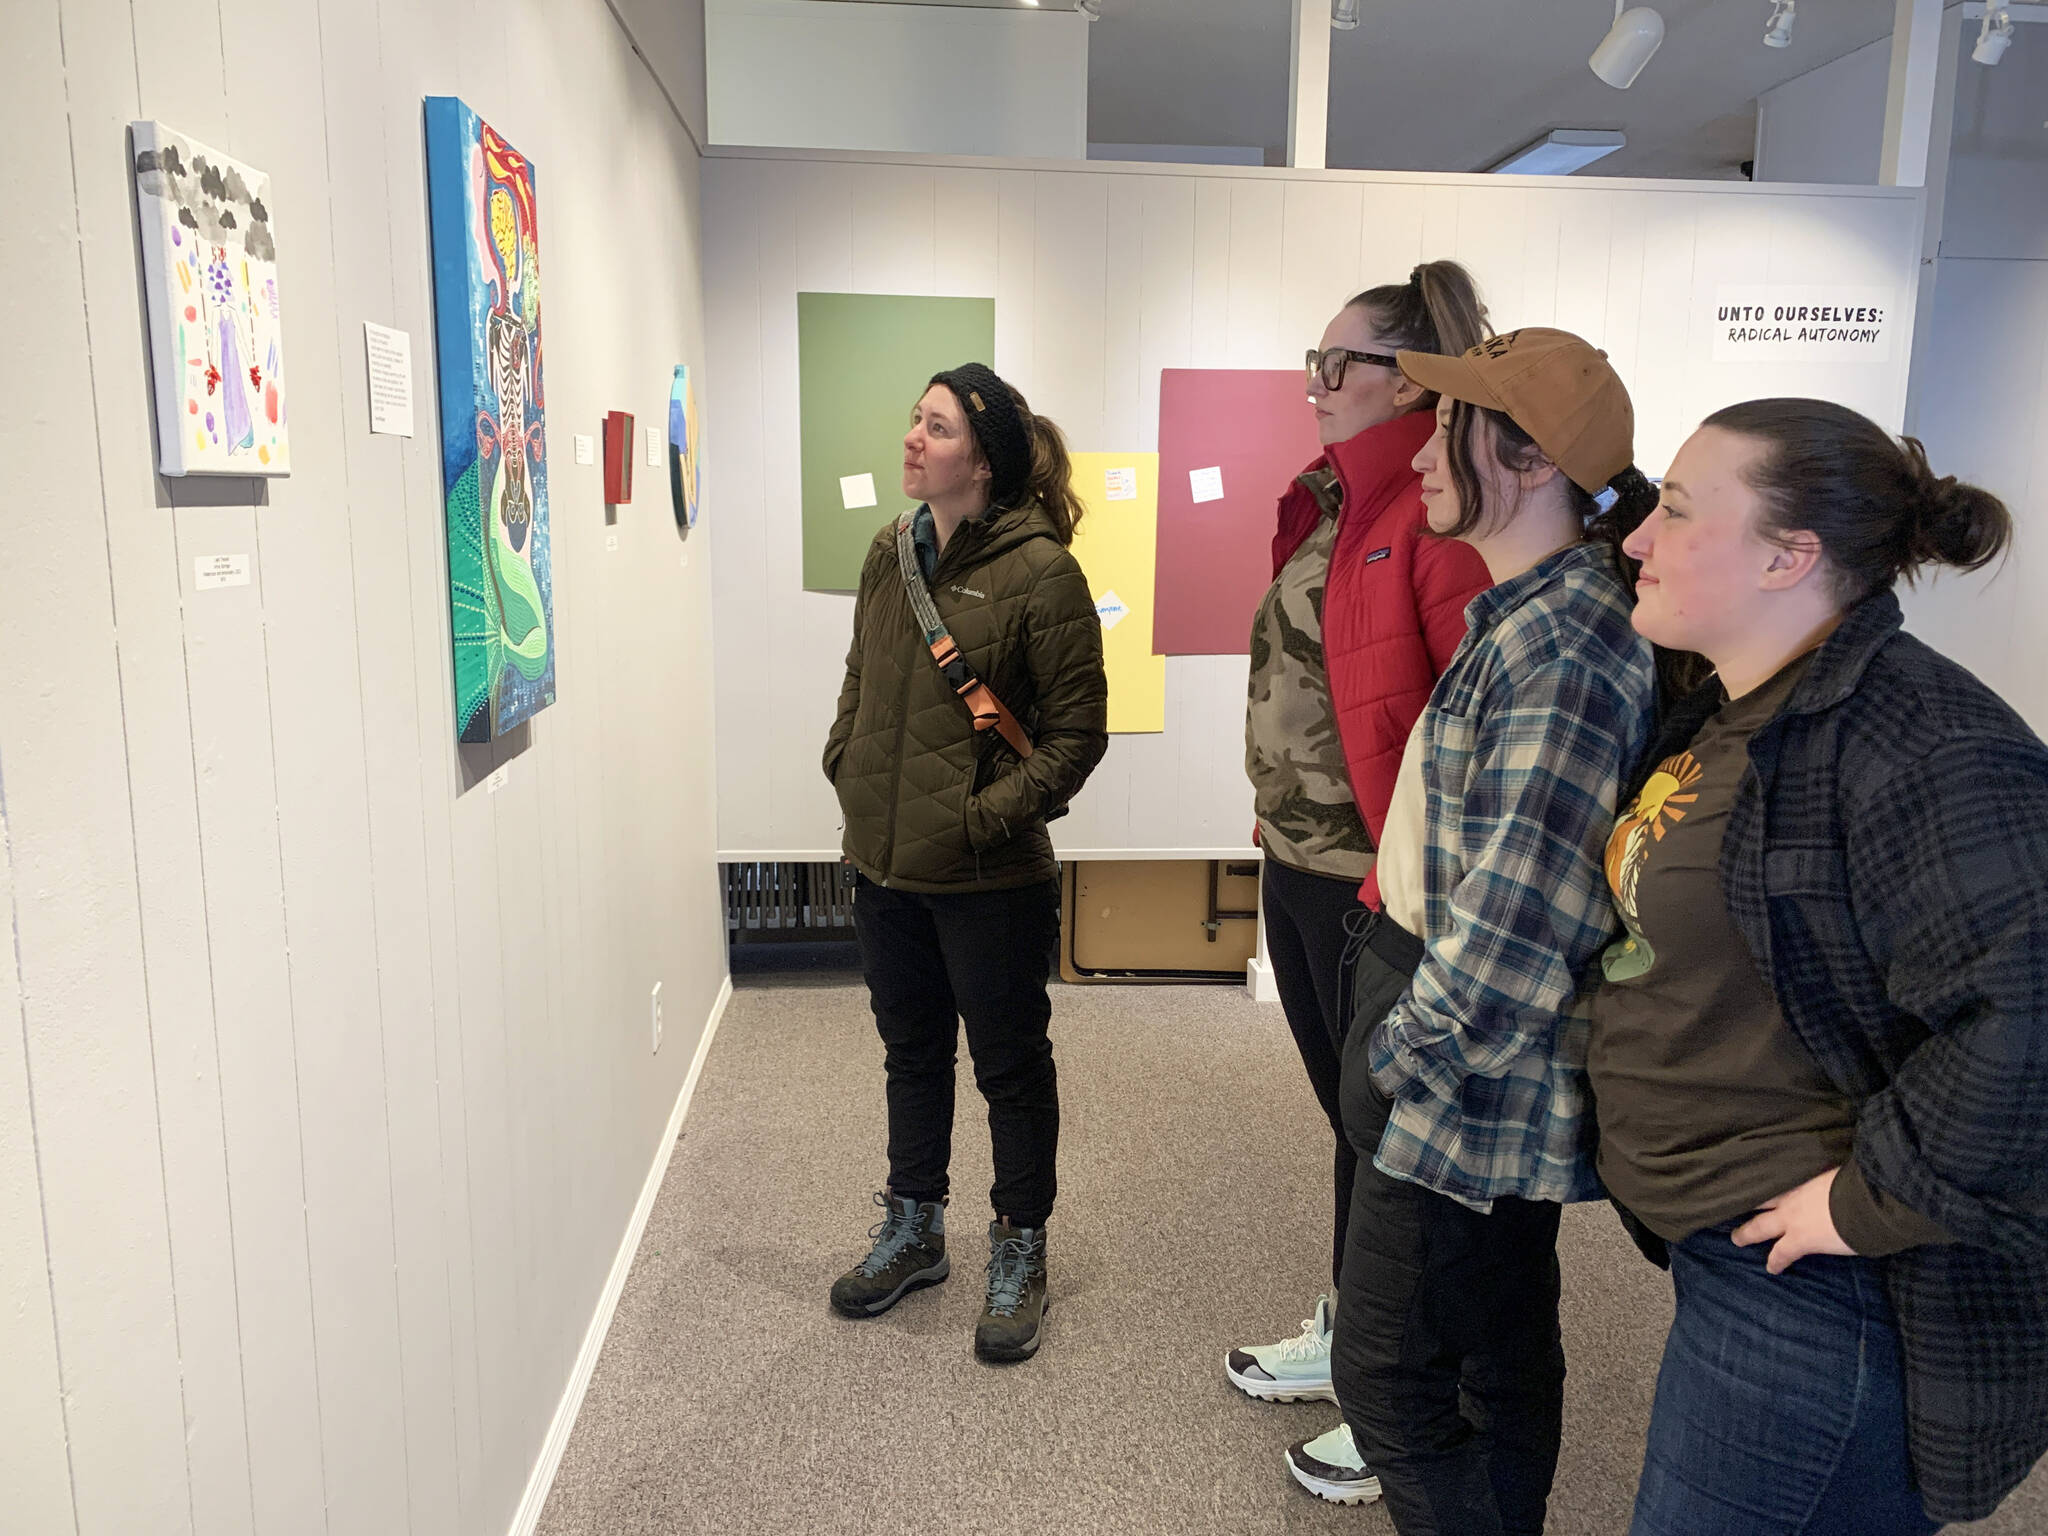 A group of young women visiting Homer take in the “Bodily Autonomy” exhibit at Homer Council on the Arts on March 15. (Photo by Christina Whiting/Homer News)